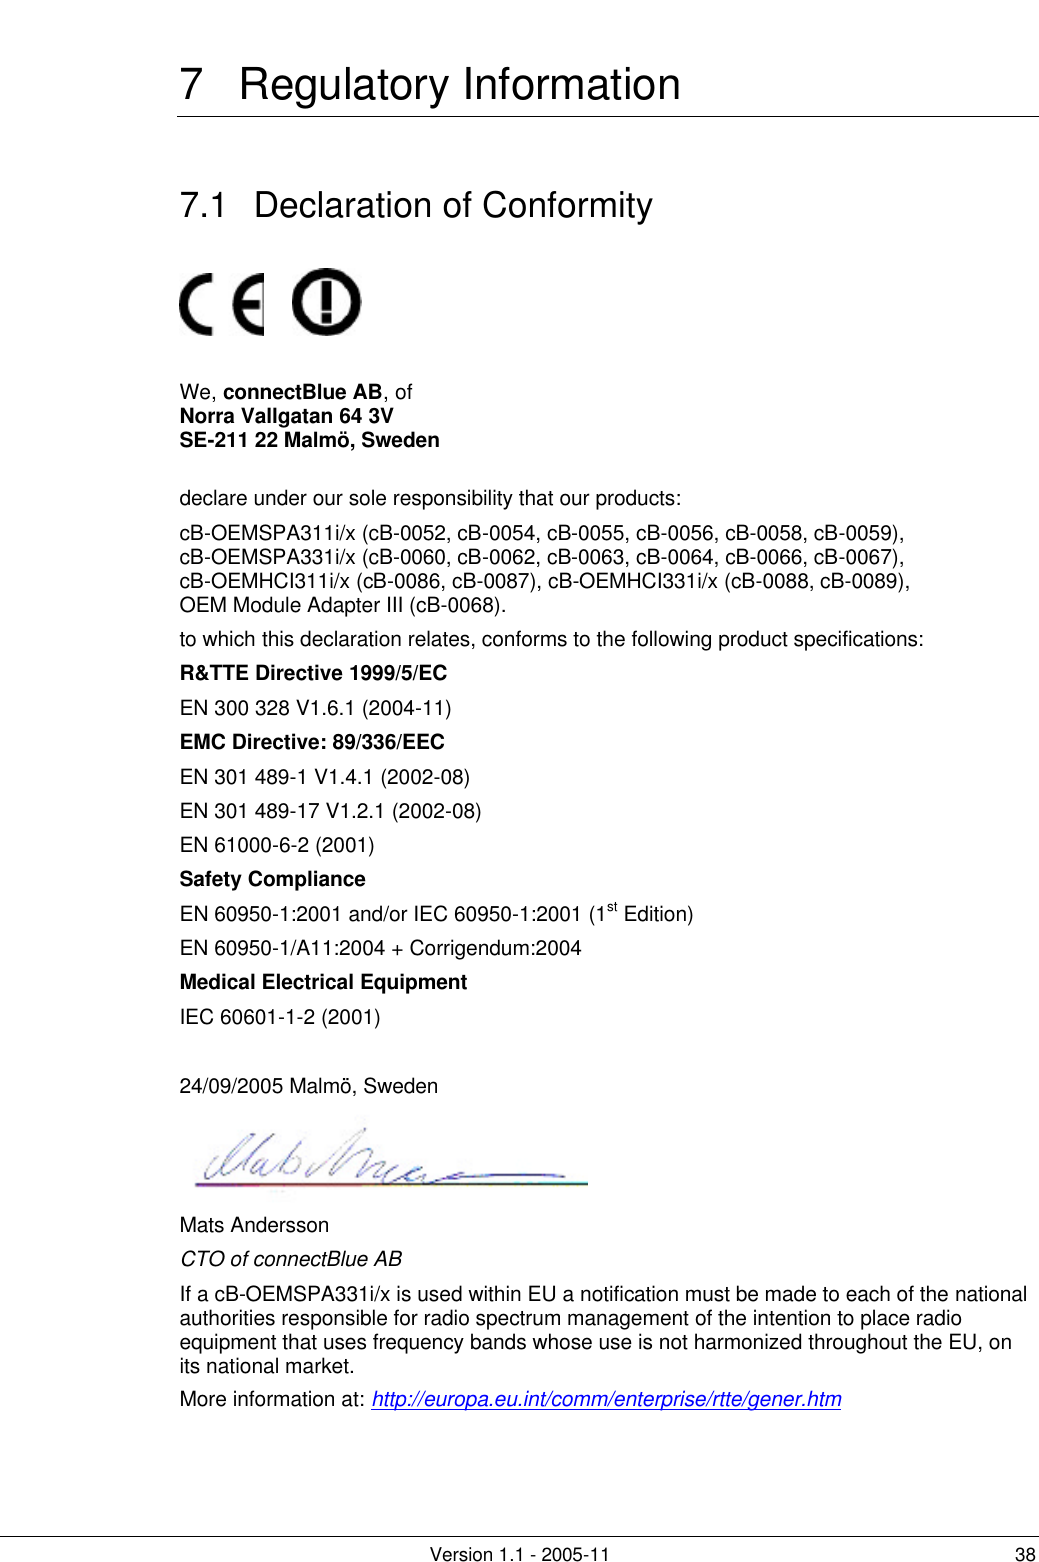         Version 1.1 - 2005-11 38 7 Regulatory Information 7.1 Declaration of Conformity          We, connectBlue AB, of  Norra Vallgatan 64 3V SE-211 22 Malmö, Sweden  declare under our sole responsibility that our products:  cB-OEMSPA311i/x (cB-0052, cB-0054, cB-0055, cB-0056, cB-0058, cB-0059), cB-OEMSPA331i/x (cB-0060, cB-0062, cB-0063, cB-0064, cB-0066, cB-0067), cB-OEMHCI311i/x (cB-0086, cB-0087), cB-OEMHCI331i/x (cB-0088, cB-0089), OEM Module Adapter III (cB-0068). to which this declaration relates, conforms to the following product specifications: R&amp;TTE Directive 1999/5/EC EN 300 328 V1.6.1 (2004-11) EMC Directive: 89/336/EEC EN 301 489-1 V1.4.1 (2002-08) EN 301 489-17 V1.2.1 (2002-08) EN 61000-6-2 (2001) Safety Compliance EN 60950-1:2001 and/or IEC 60950-1:2001 (1st Edition)  EN 60950-1/A11:2004 + Corrigendum:2004 Medical Electrical Equipment IEC 60601-1-2 (2001)  24/09/2005 Malmö, Sweden  Mats Andersson CTO of connectBlue AB If a cB-OEMSPA331i/x is used within EU a notification must be made to each of the national authorities responsible for radio spectrum management of the intention to place radio equipment that uses frequency bands whose use is not harmonized throughout the EU, on its national market. More information at: http://europa.eu.int/comm/enterprise/rtte/gener.htm 